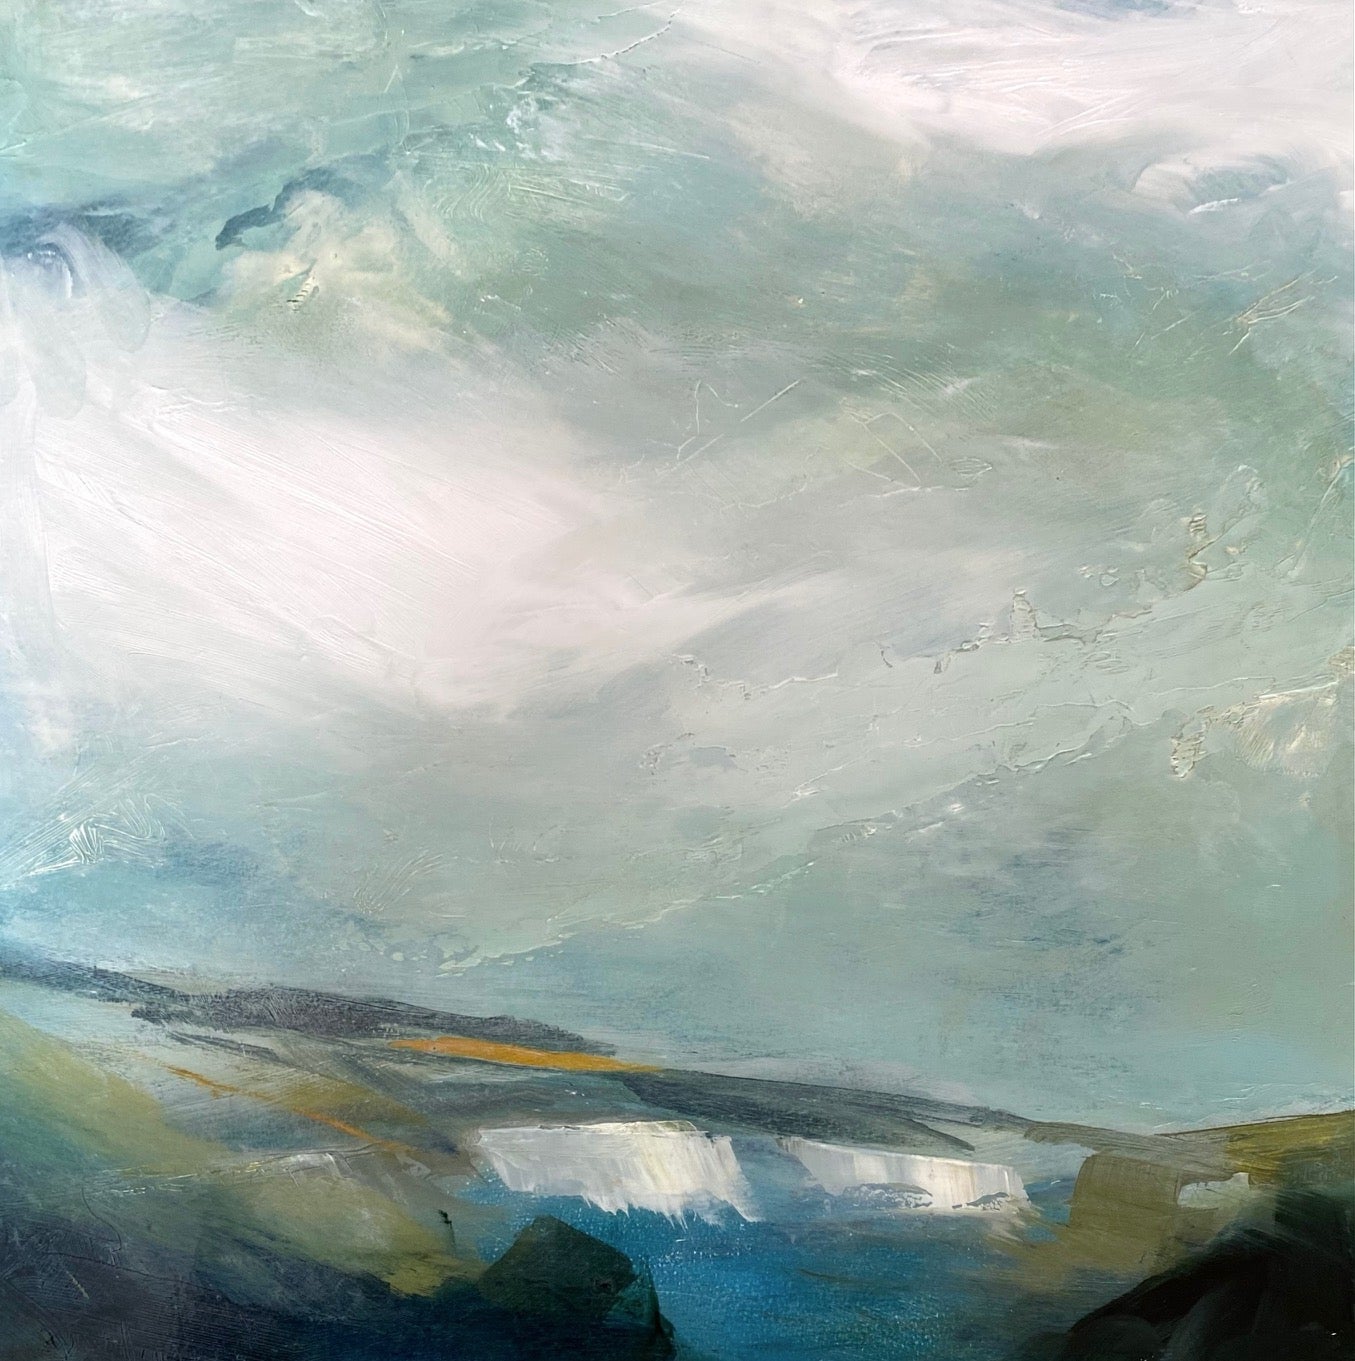 Fleeting Light by Elaine Fox [2022]

This painting was inspired by the rugged beauty of the Peak District and the light on heavy days. There is always that sense of impending rain but just now and again the light shines through to give a beautiful